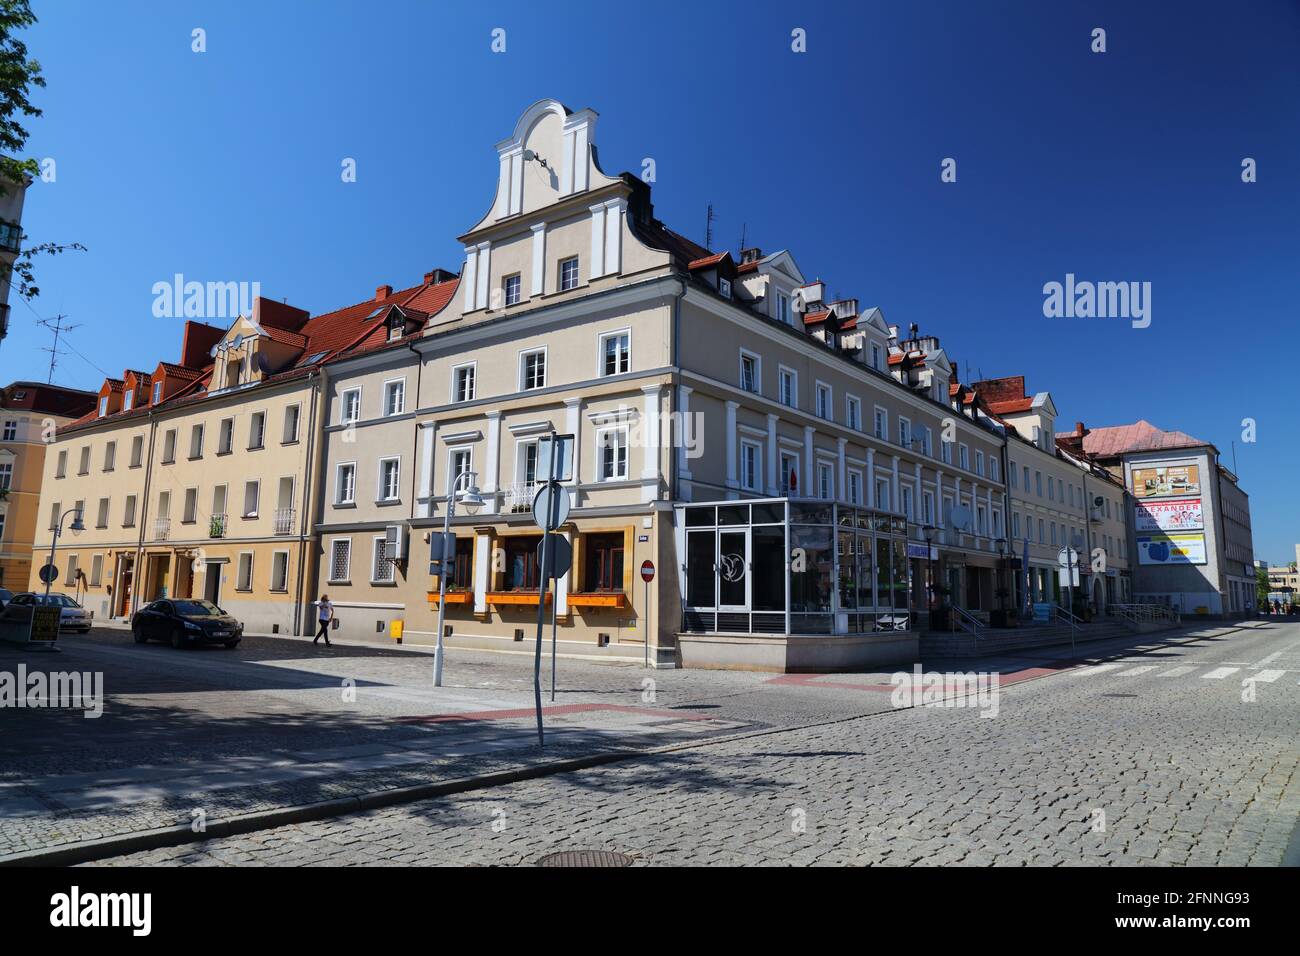 RACIBORZ, POLAND - MAY 11, 2021: Old Town of Raciborz city, Poland. Raciborz is an important city in Southern Poland with 54,000 inhabitants. Stock Photo